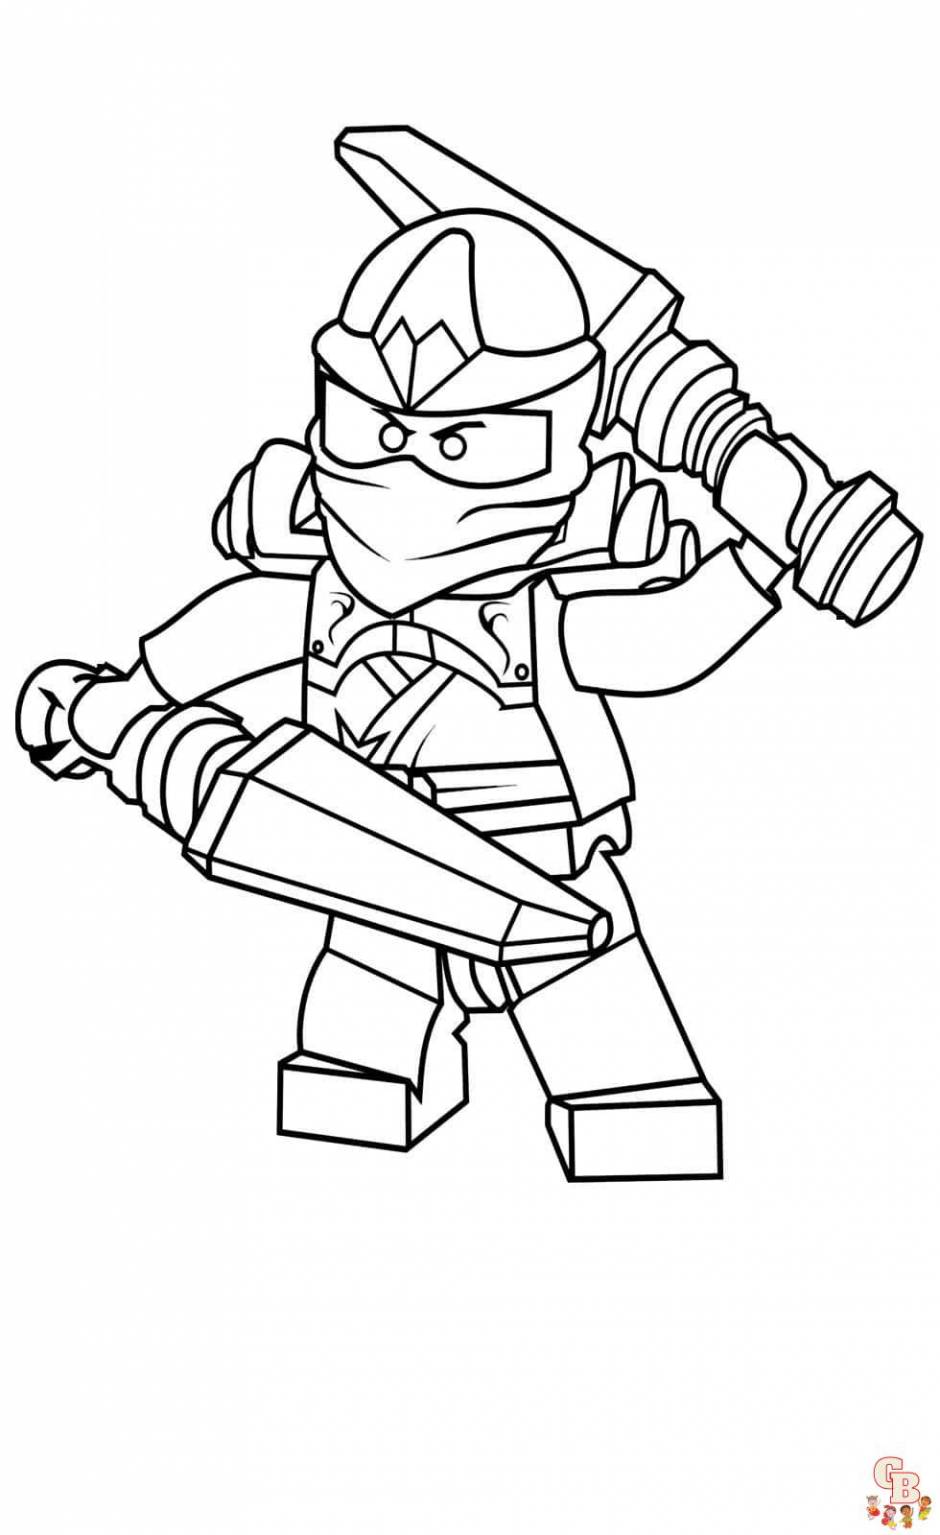 Fun Lego Ninjago Coloring Pages for Kids